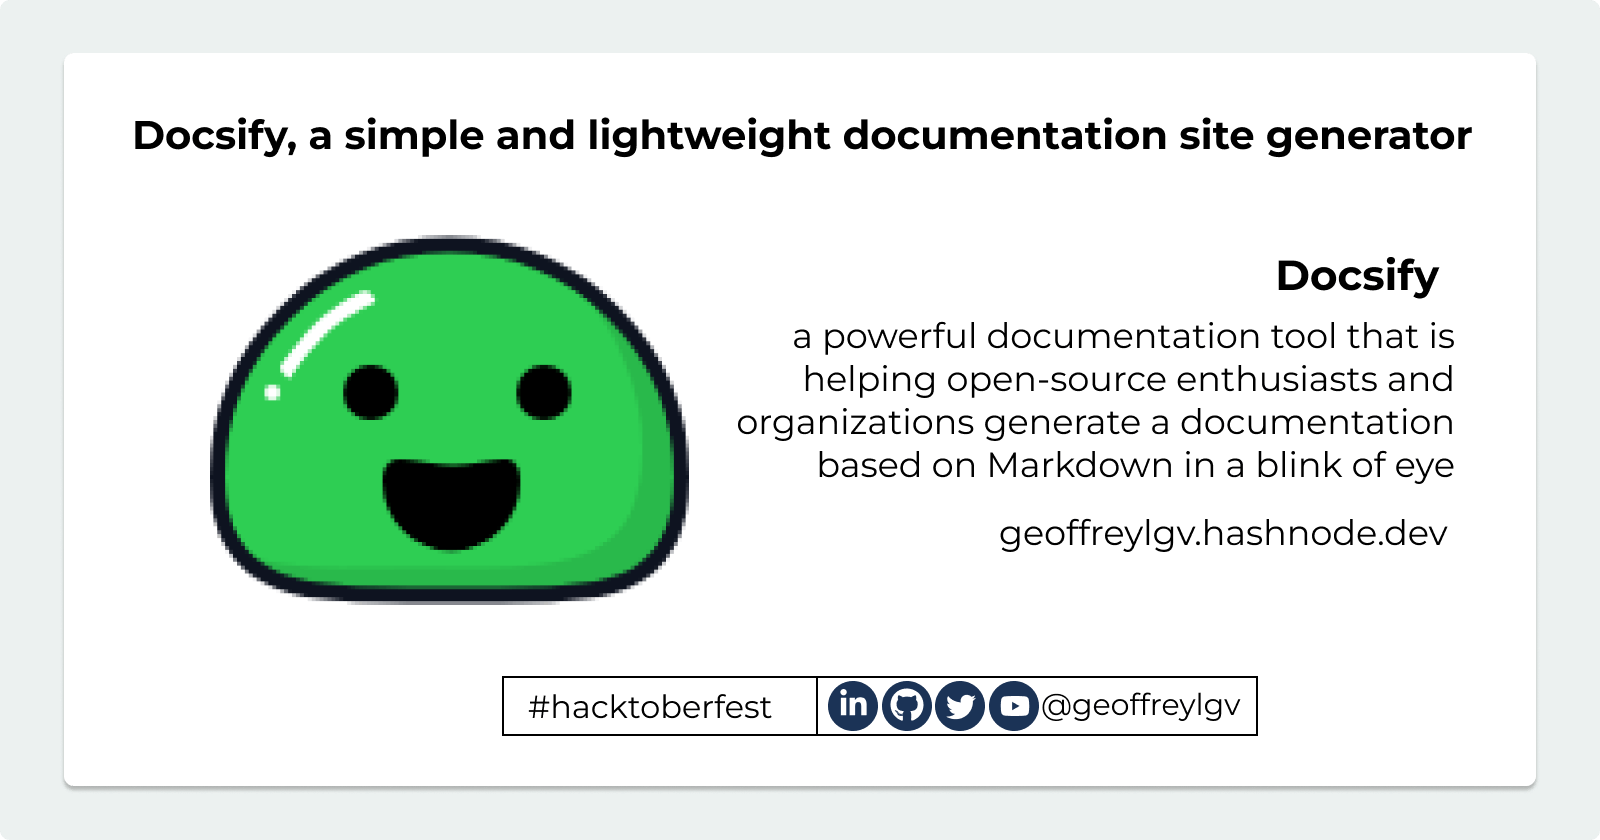 Docsify, a simple and lightweight documentation site generator